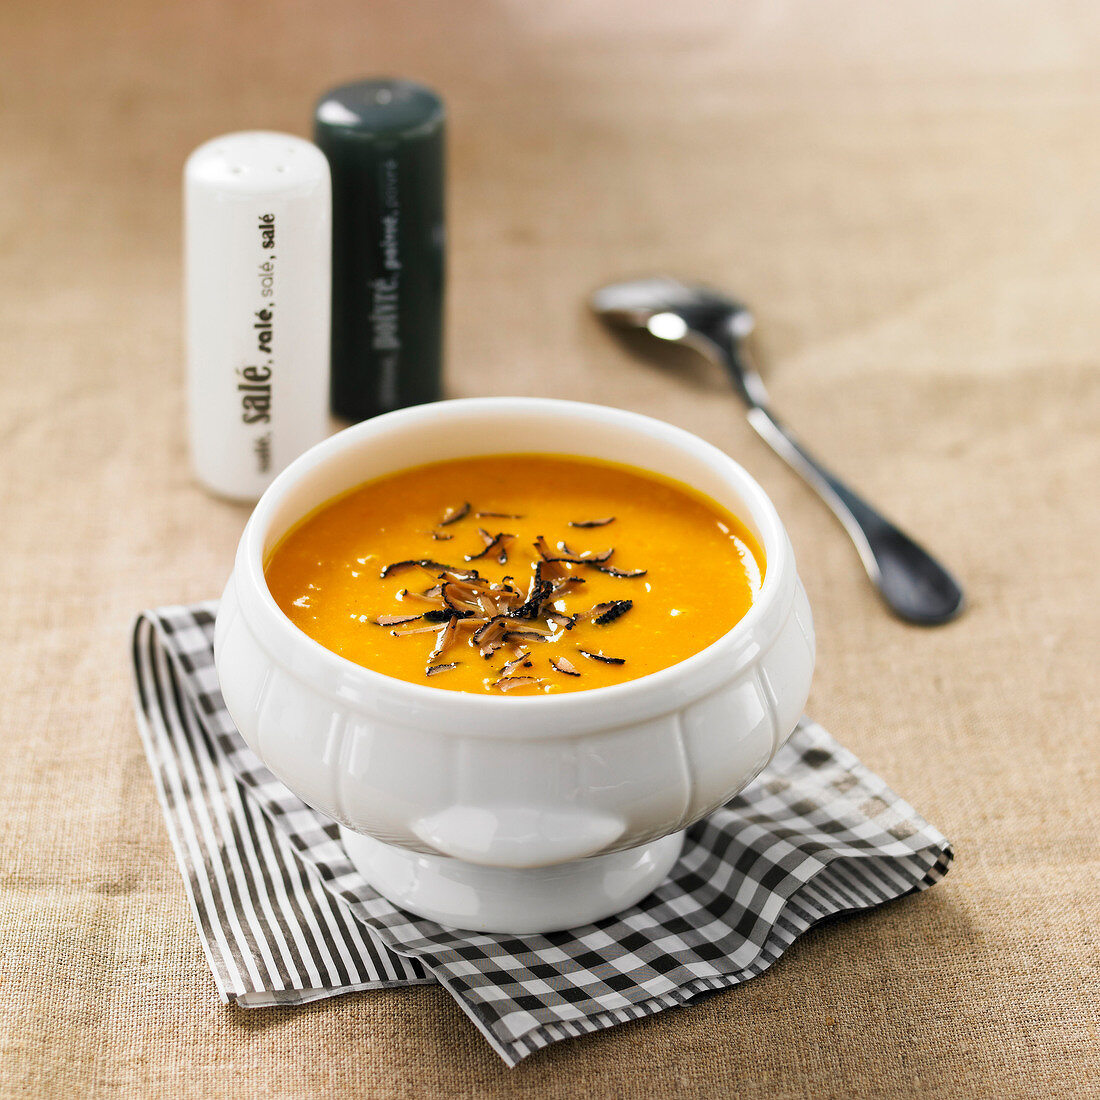 Creamed pumpkin soup with truffles